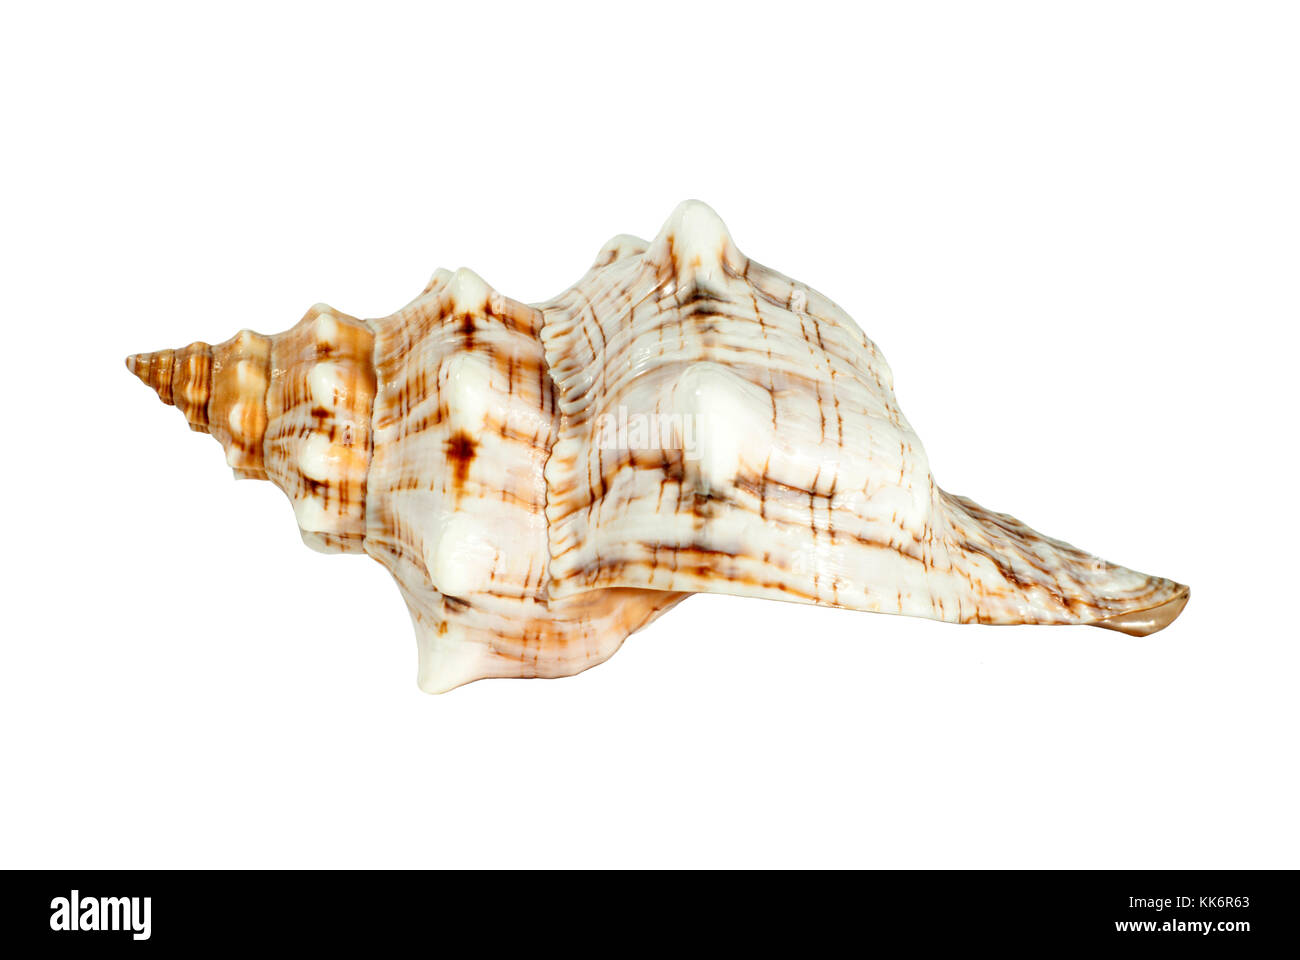 shell of a sea mollusk with picturesque bumps, pattern, stripes and specks isolated Stock Photo